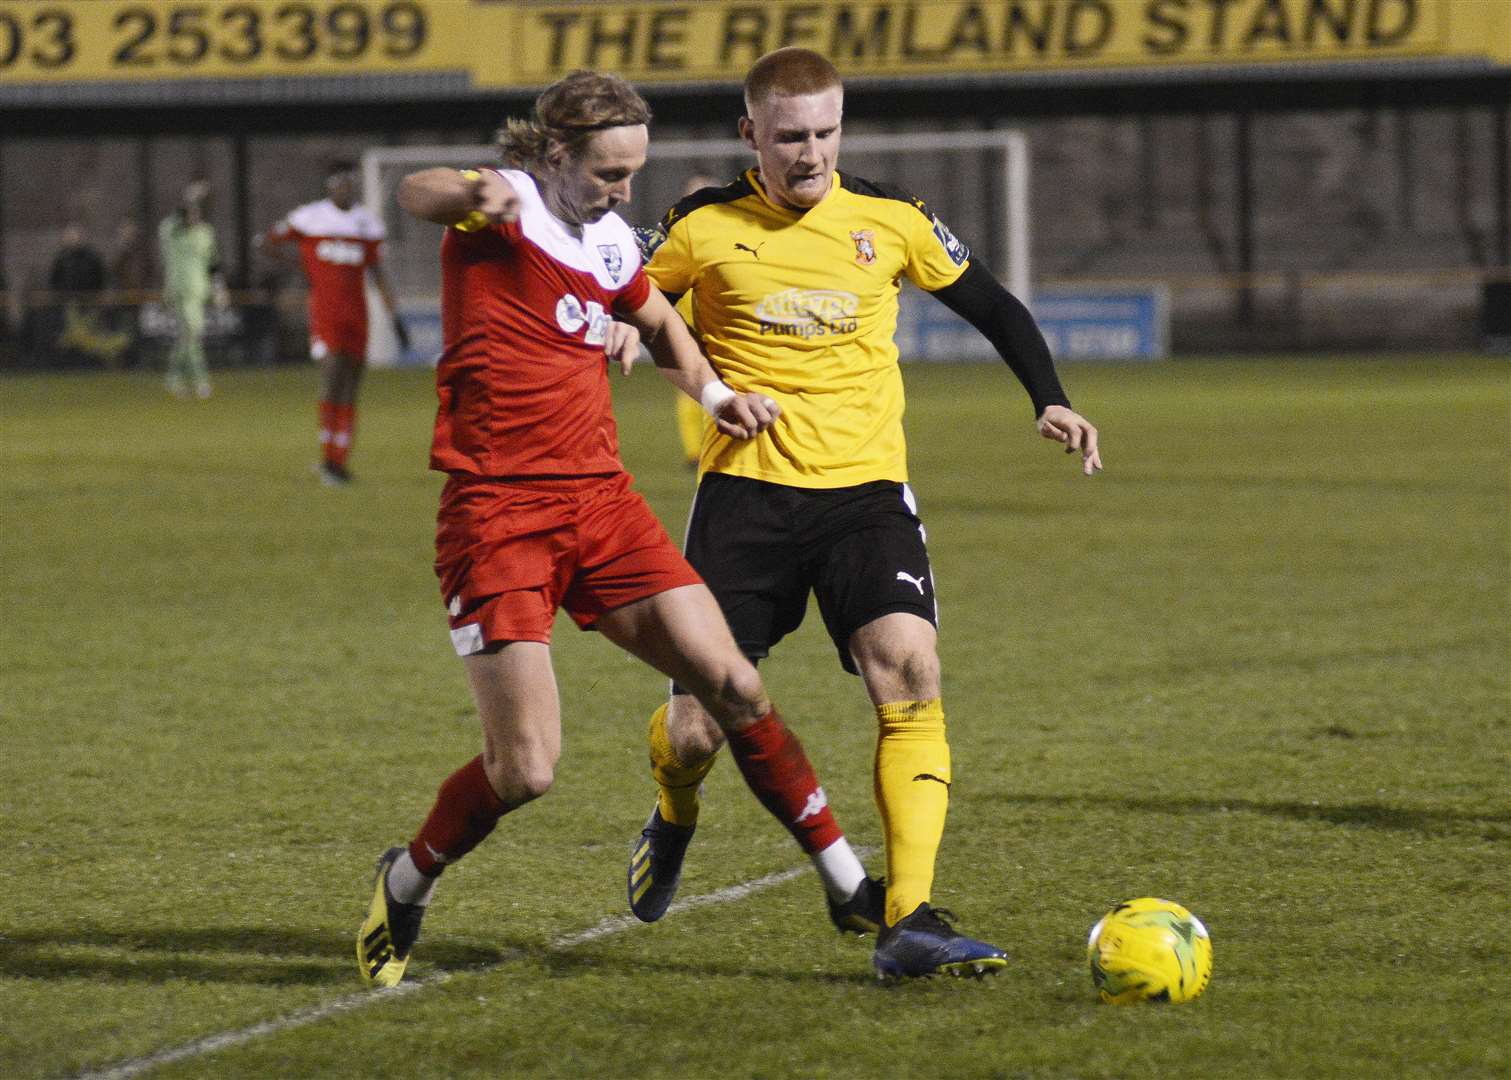 Finn O'Mara in action for Folkestone Picture: Paul Amos